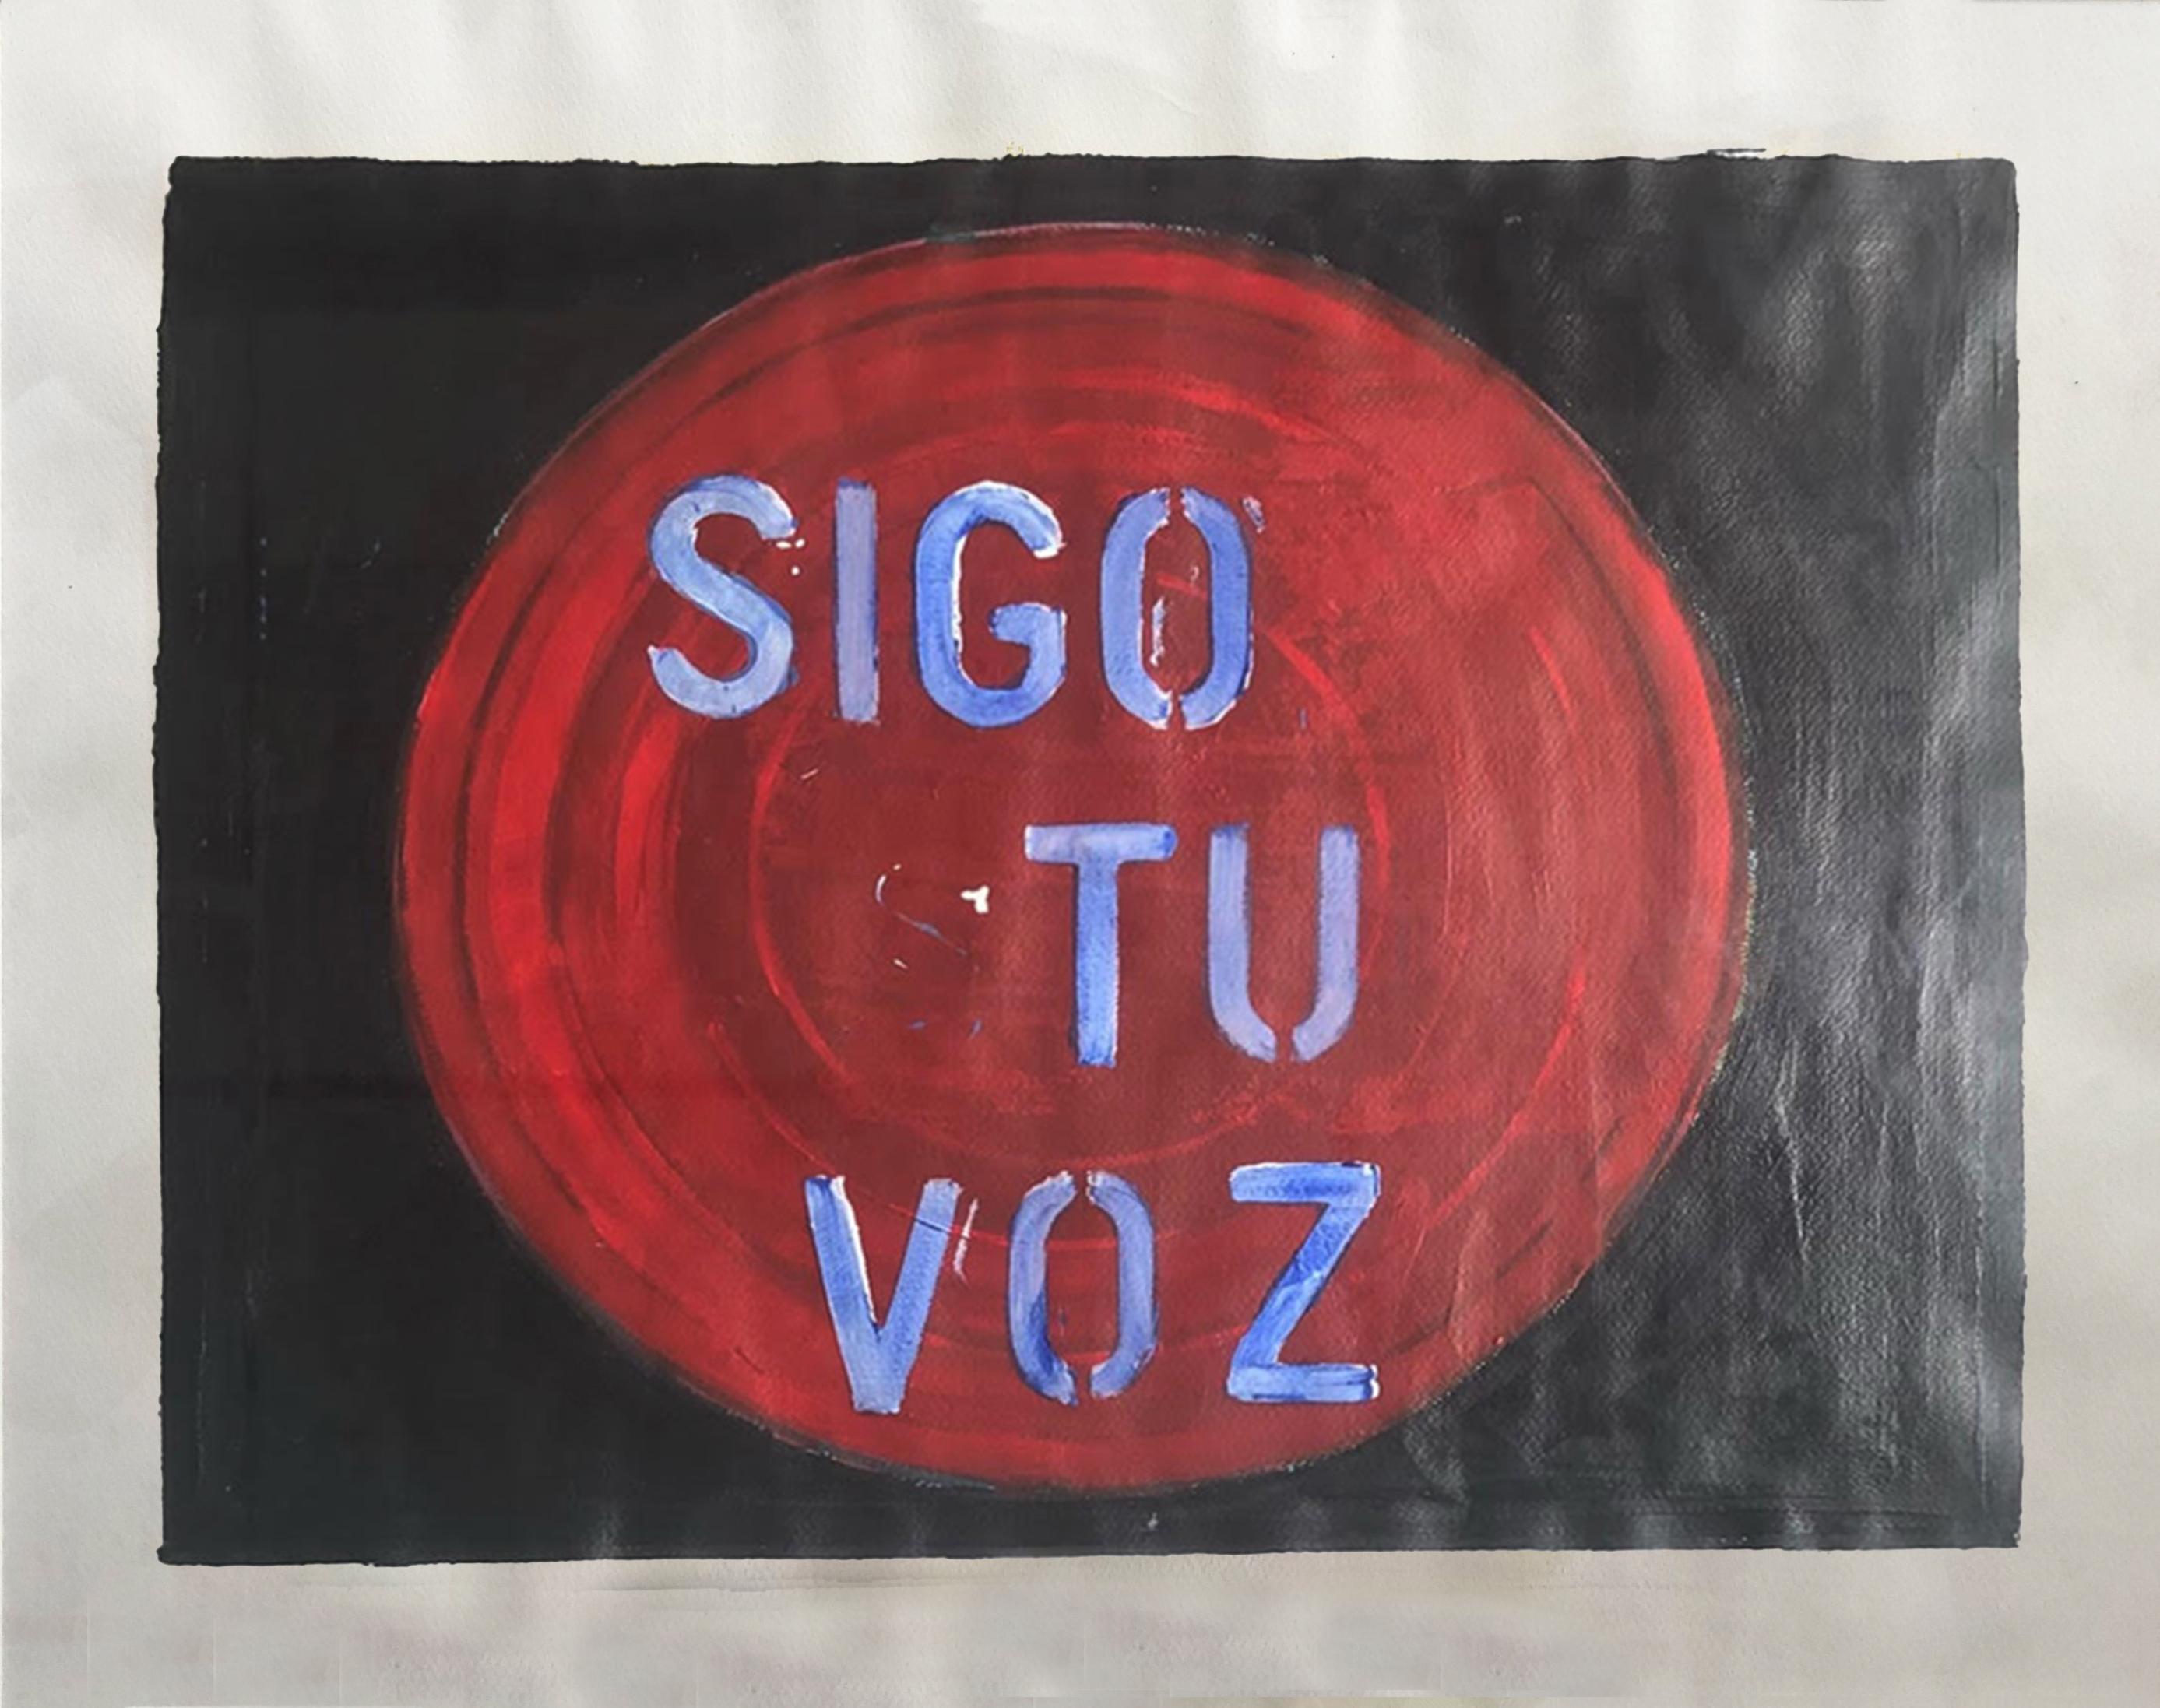 Sergio Bazan Abstract Painting - Sigo tu voz, from the Chaleco Quimico series. Abstract painting on Paper